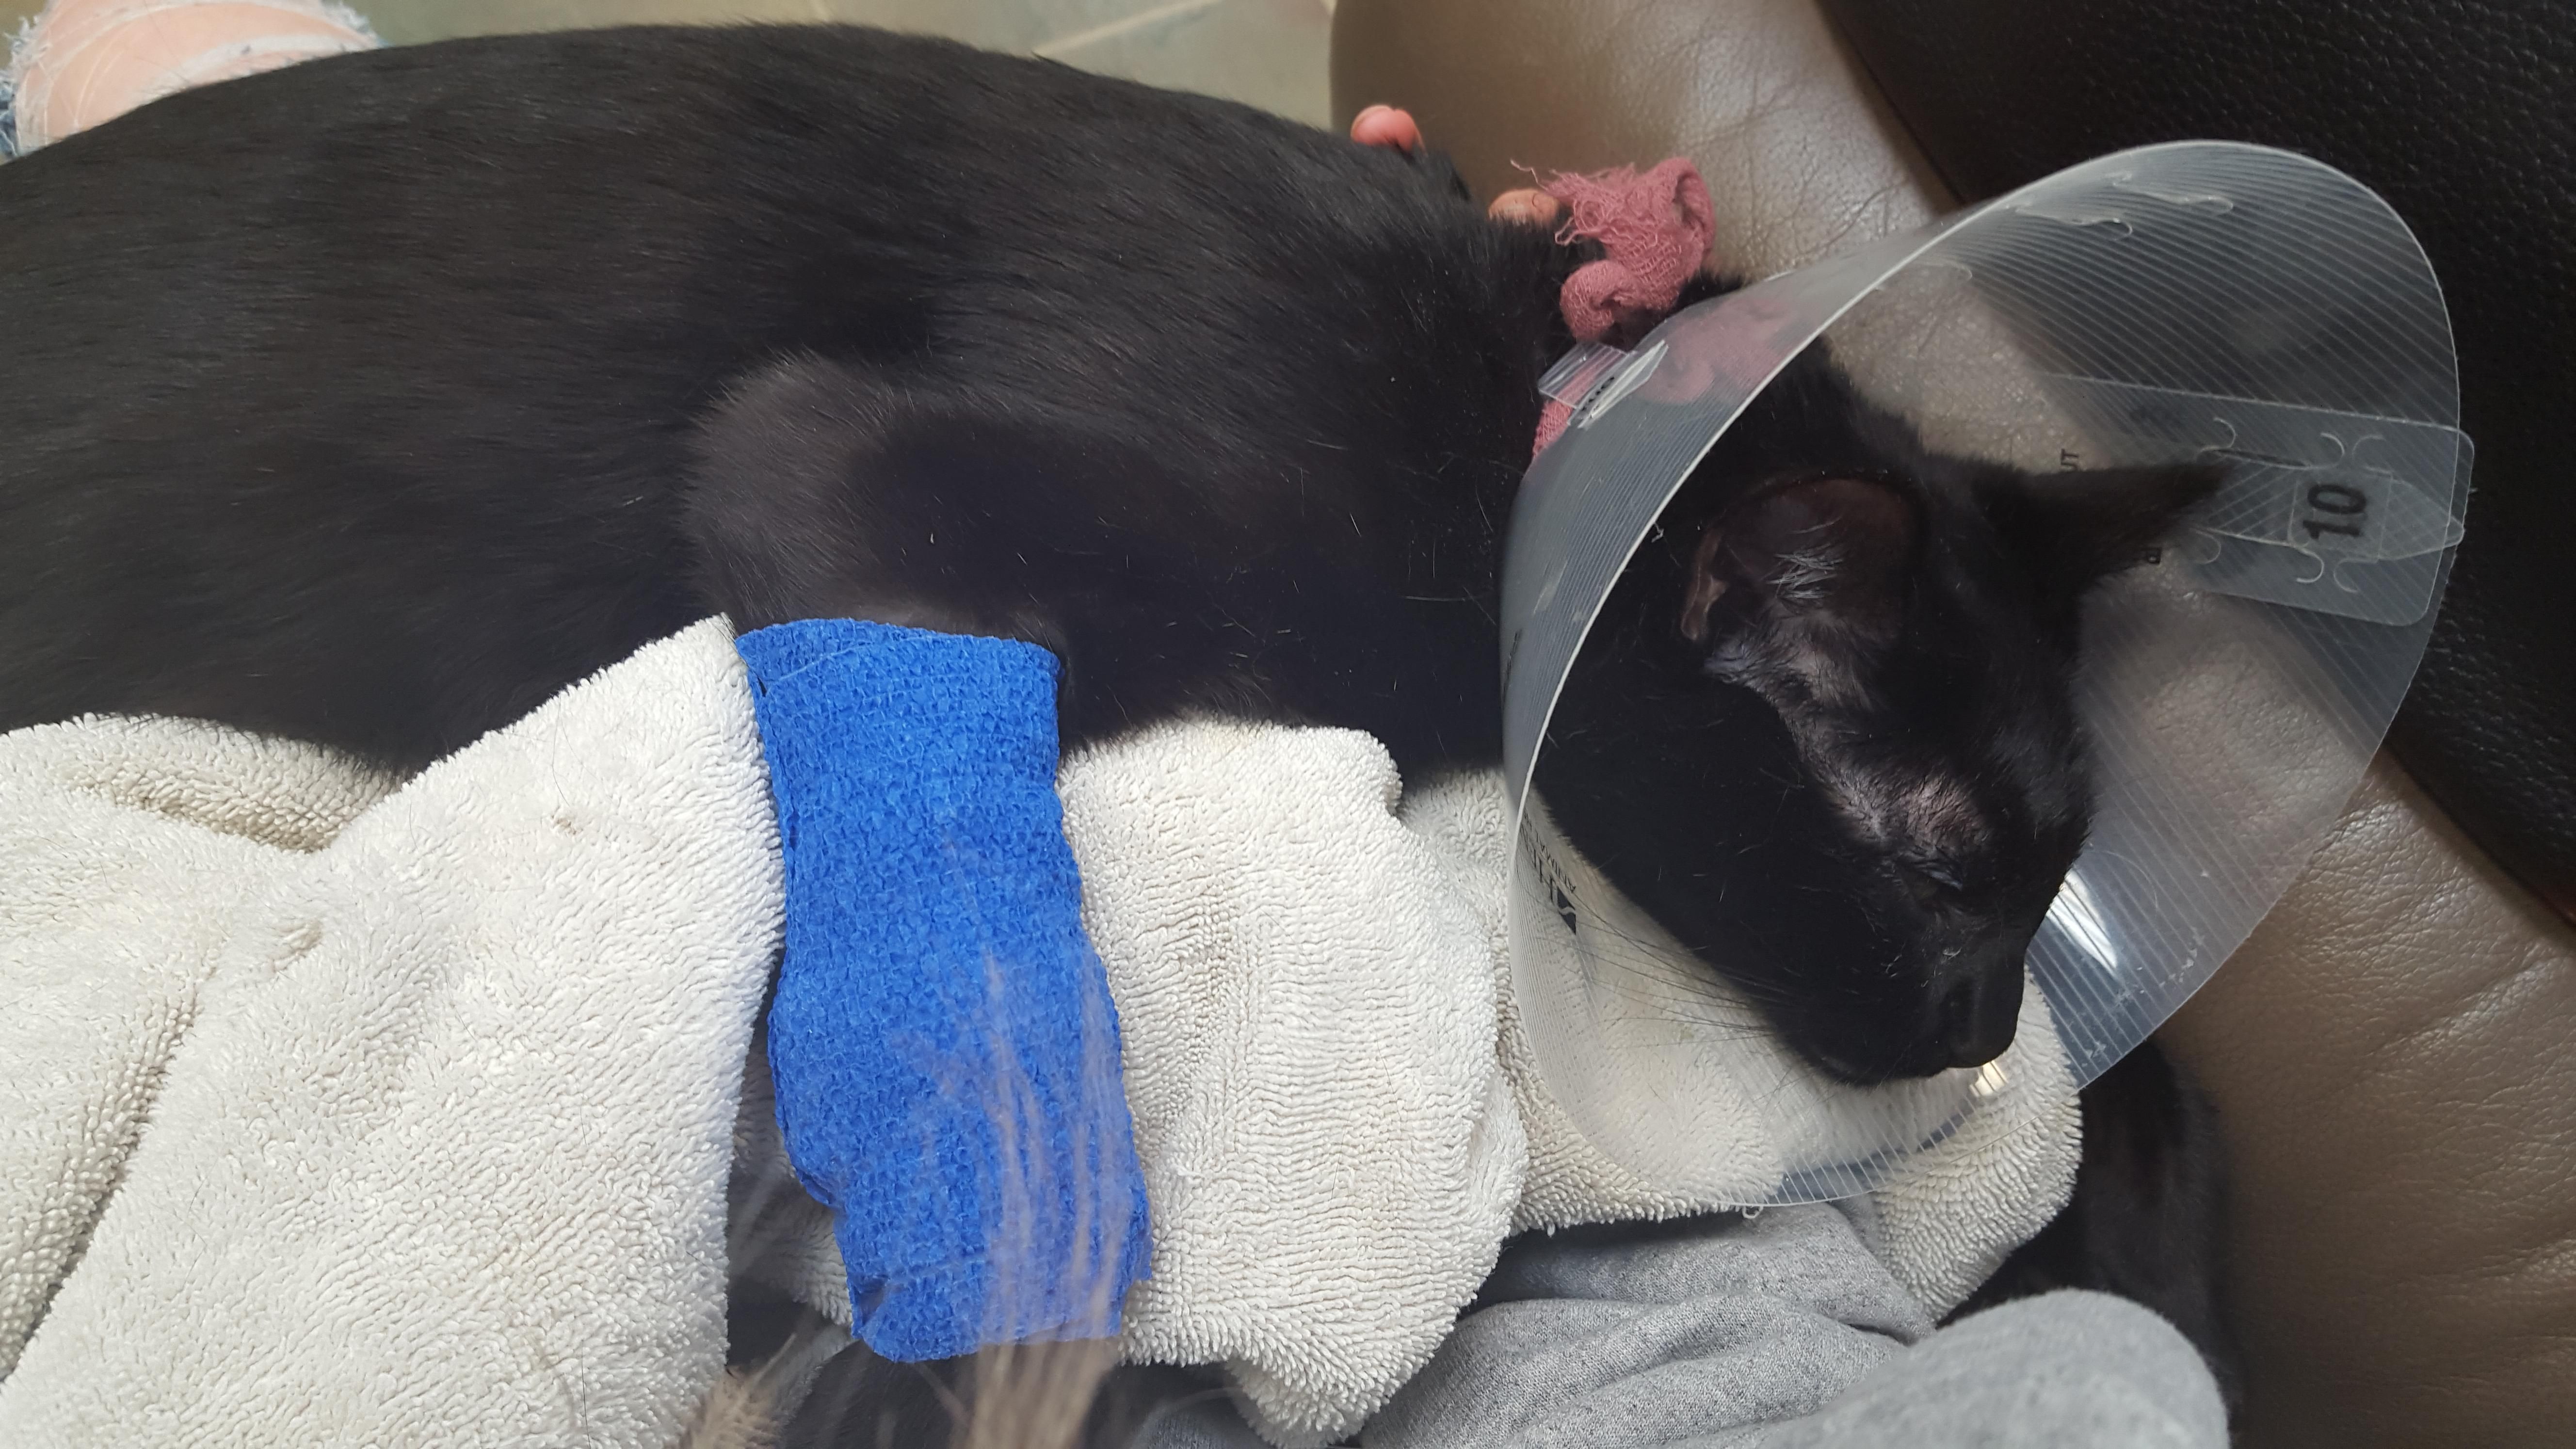 Cat Almost Dies After Eating Hair Ties - Don't Let Kittens Eat String